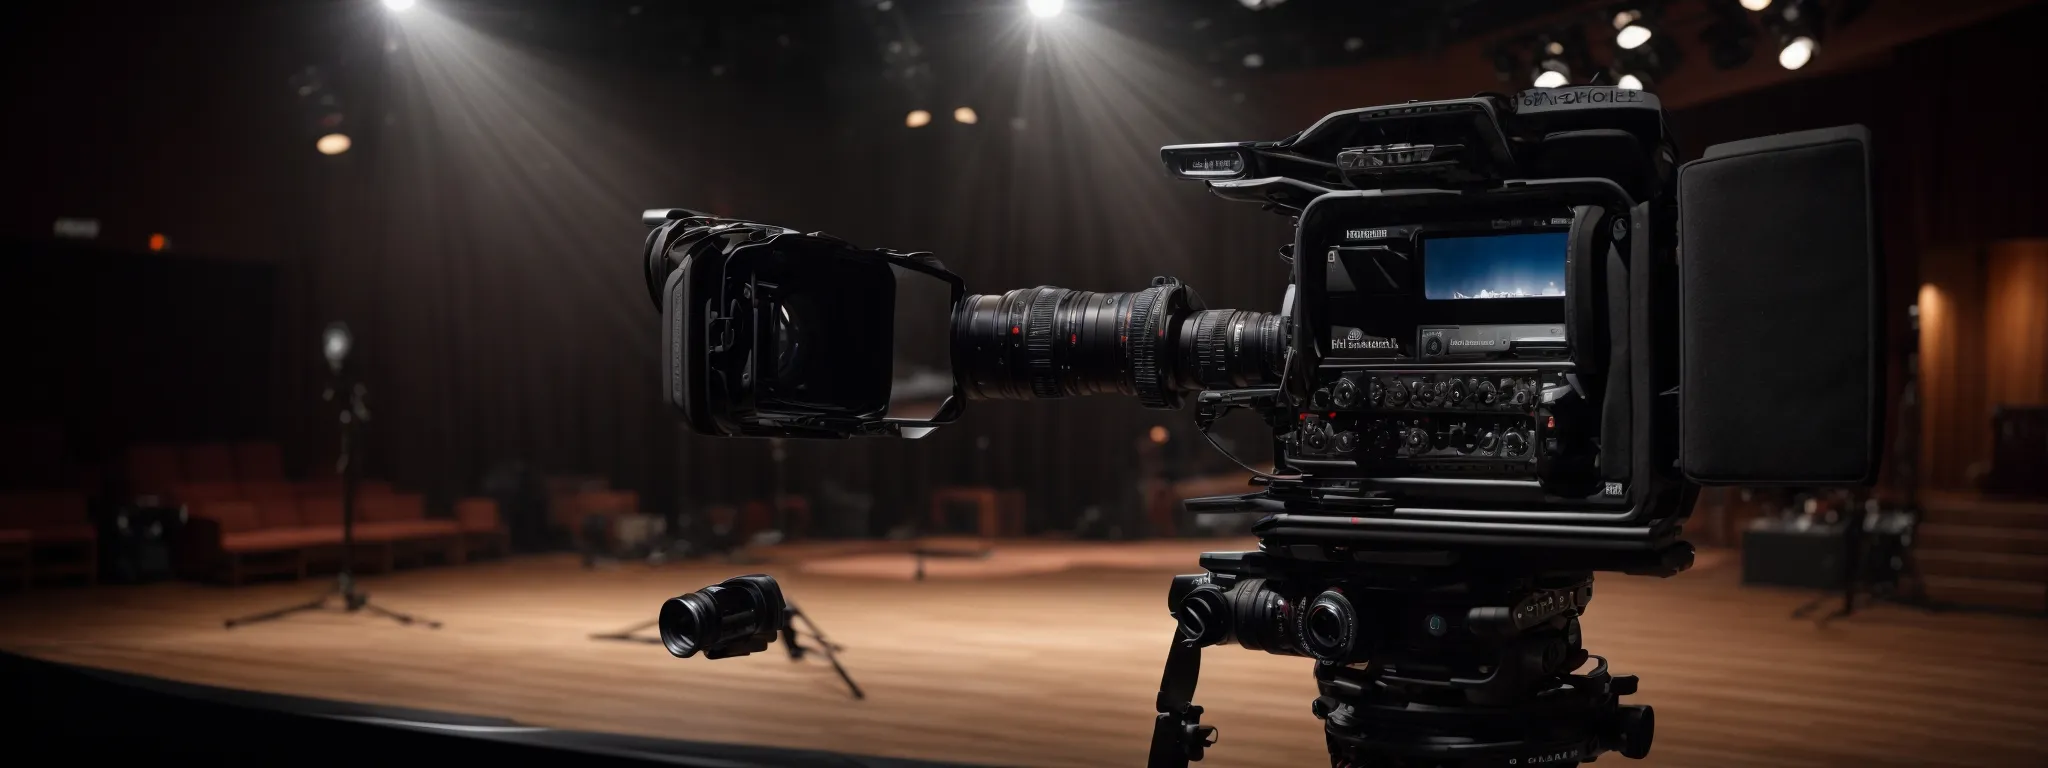 a professional camera set up for recording with a studio light positioned towards an empty stage poised for a video marketing shoot.